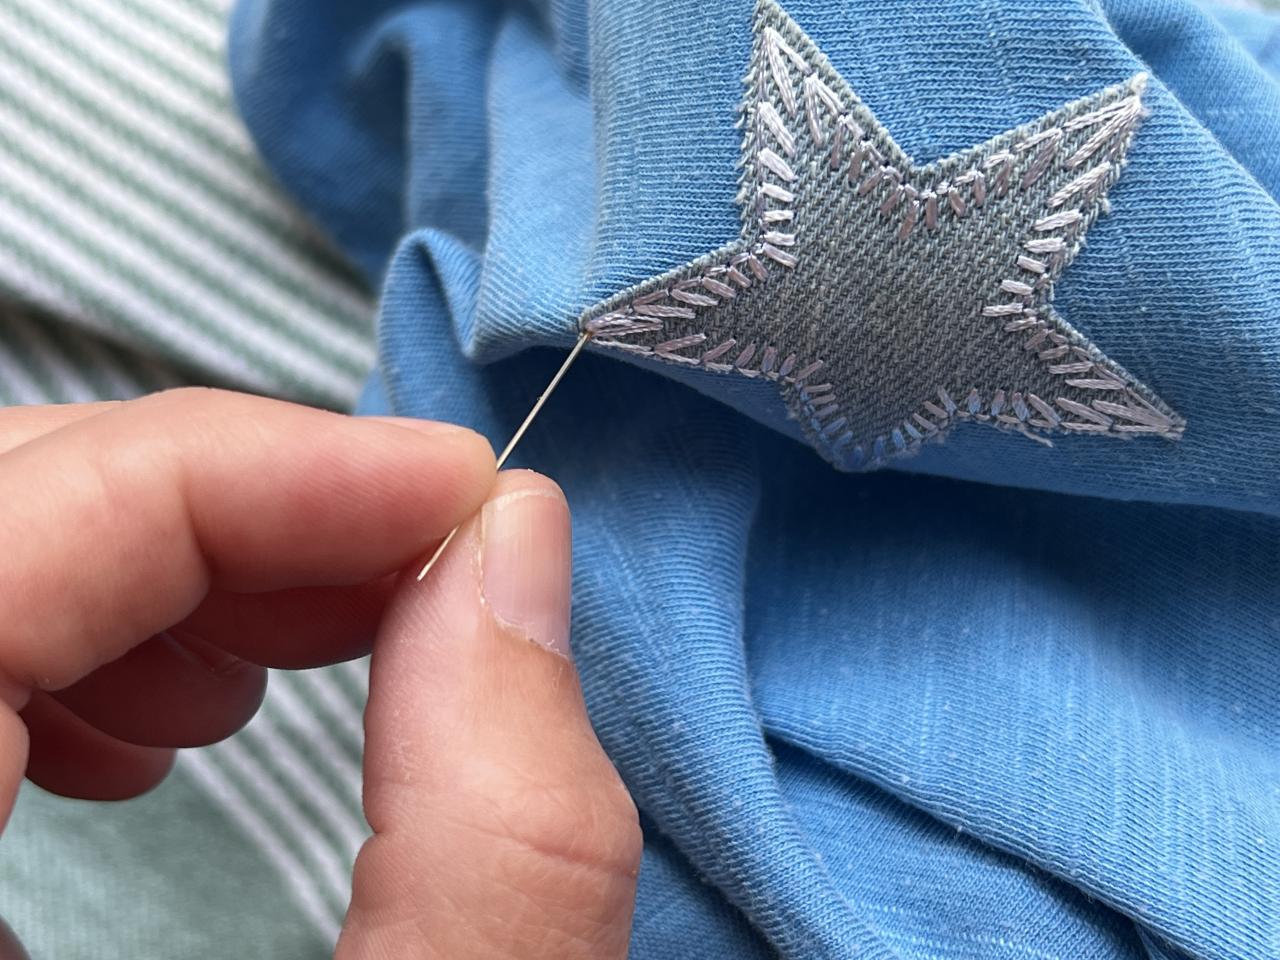 Sew a patch on a shirt - Add patches to clothing - Easy DIY